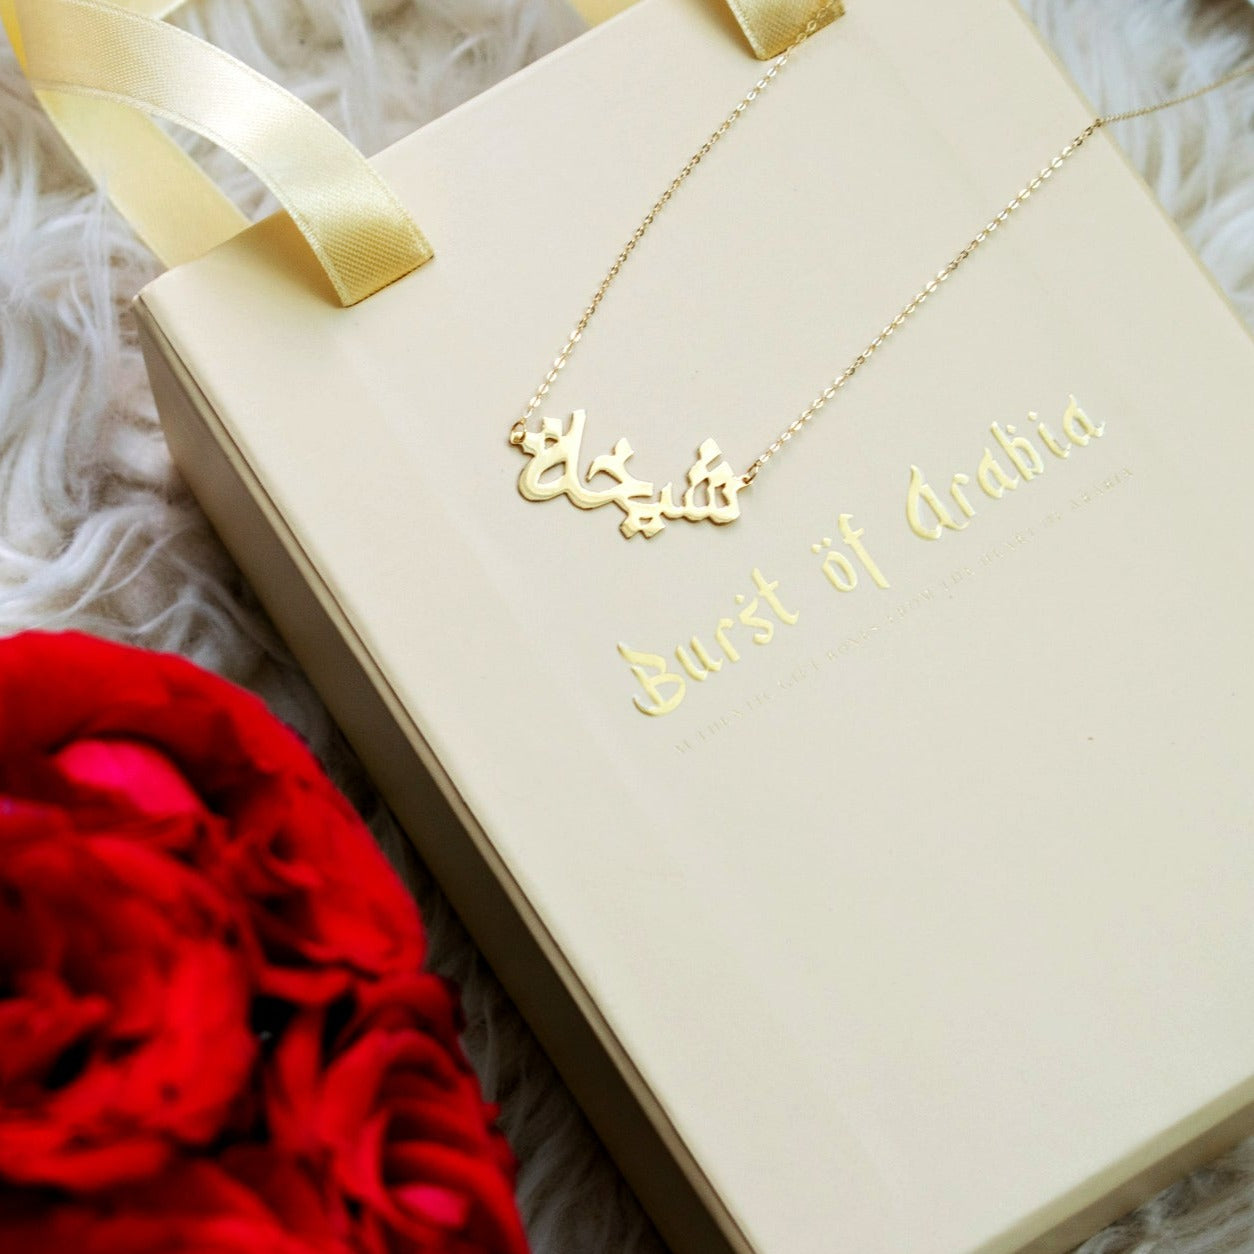 An Unforgettable Experience in Dubai  Dubai is known for its luxury and opulence, and what better way to celebrate Valentine's Day than by gifting your loved one a piece from our gold jewelry collection? Make this day truly memorable by immersing yourselves in the vibrant culture and romantic atmosphere that Dubai has to offer.